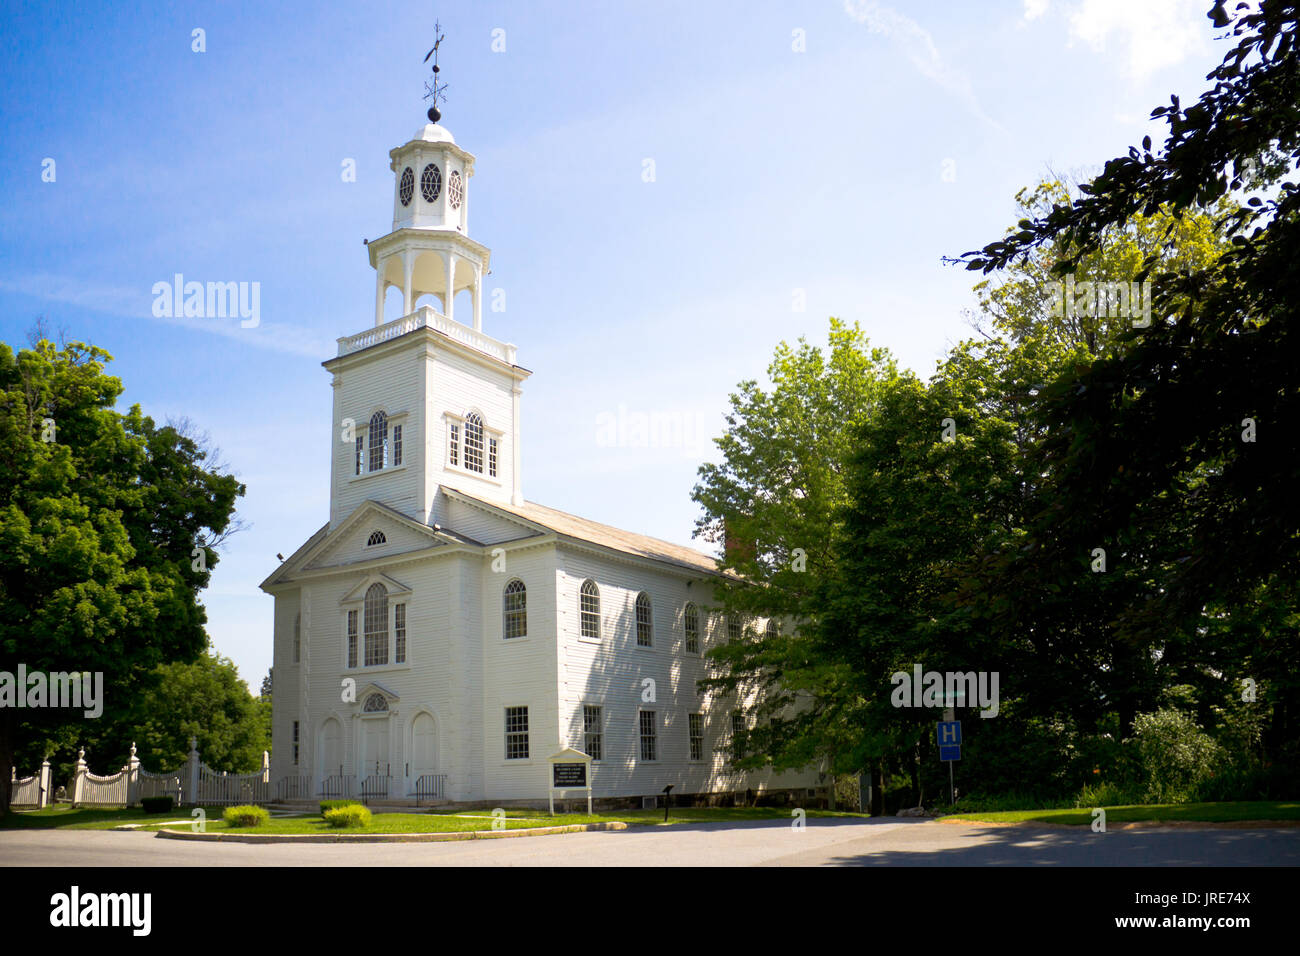 The First Church of Old Bennington, Vermont, has a cemetery with gravestones of the Revolutionary War,  dubbed Vermont's Colonial shrine. Stock Photo